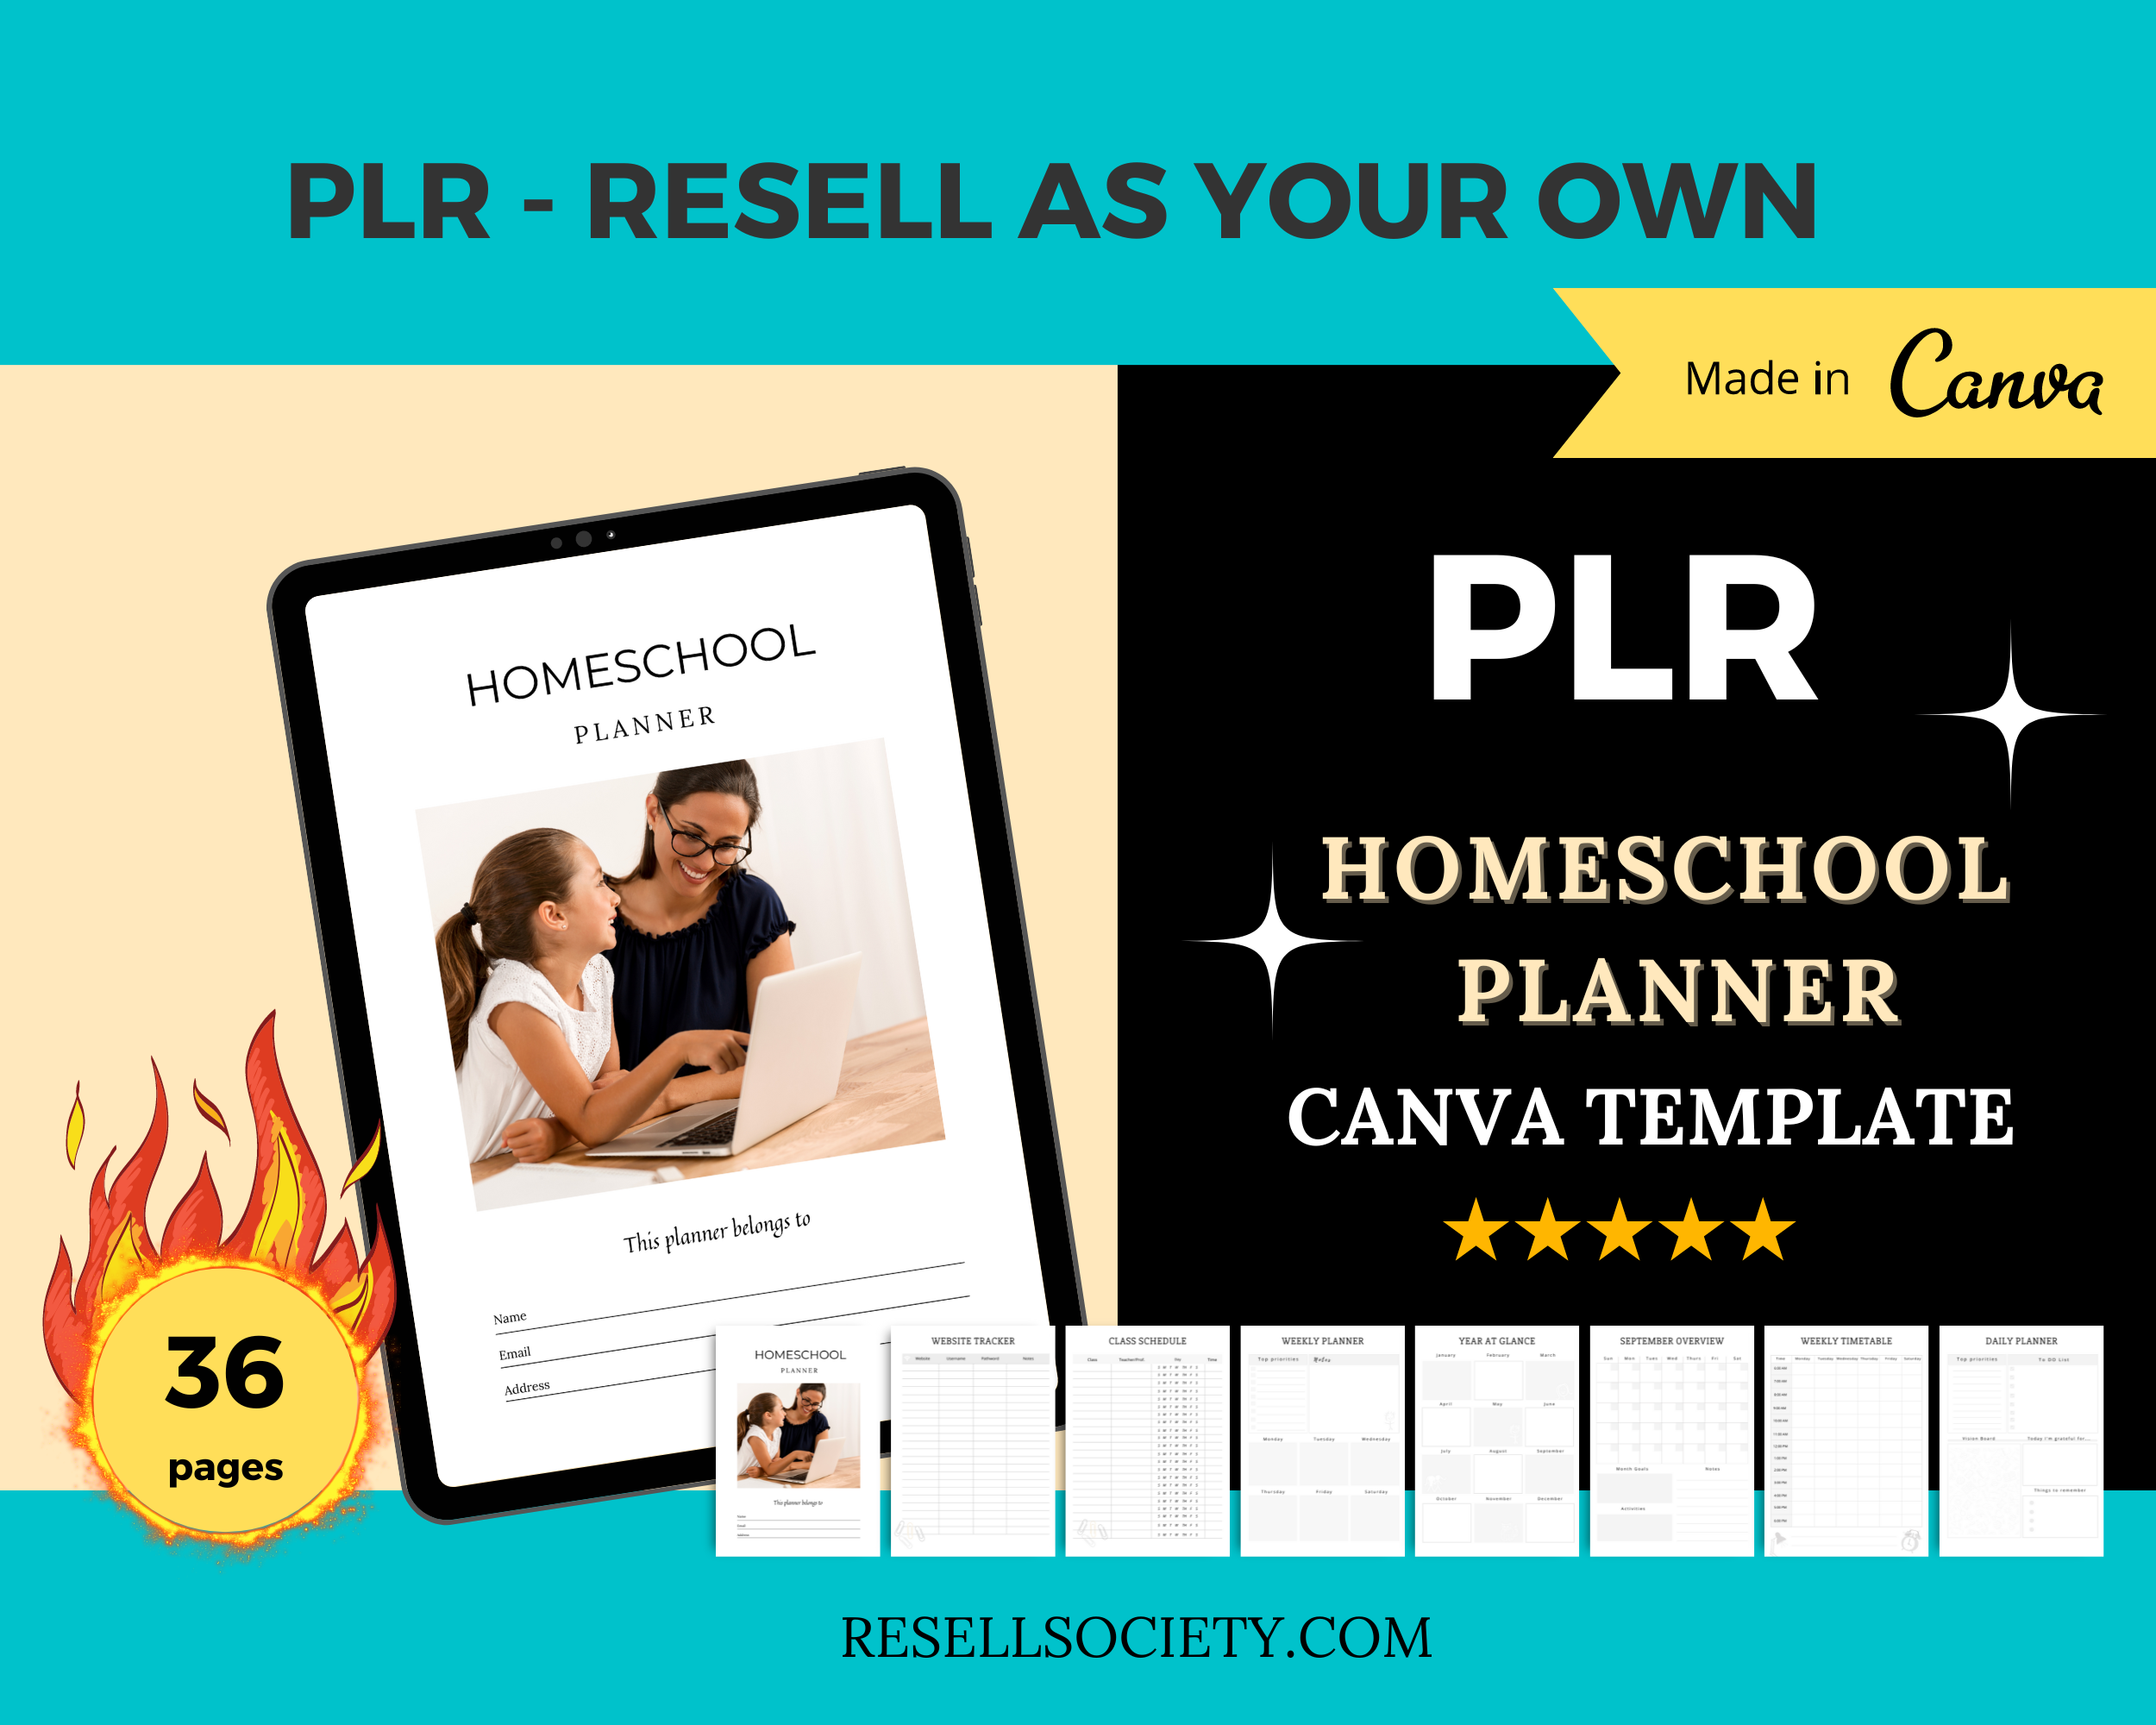 Editable Homeschool Planner in Canva | Commercial Use